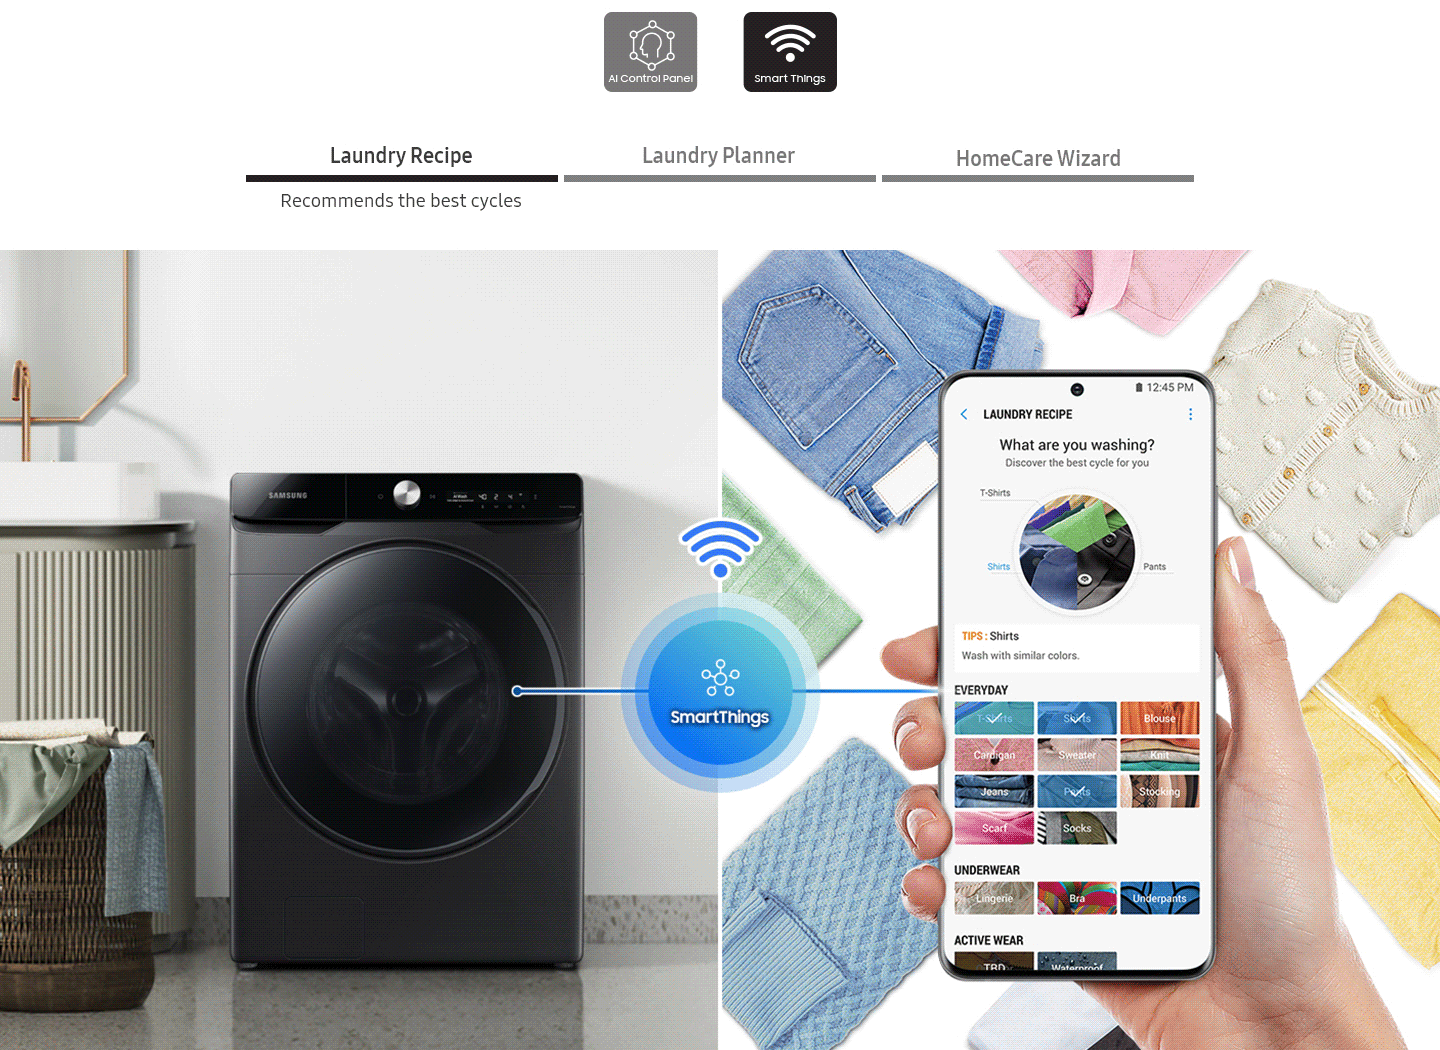 The wash cycle controlled via the SmartThings app. Laundry recipe, Laundry planner, HomeCare Wizard.